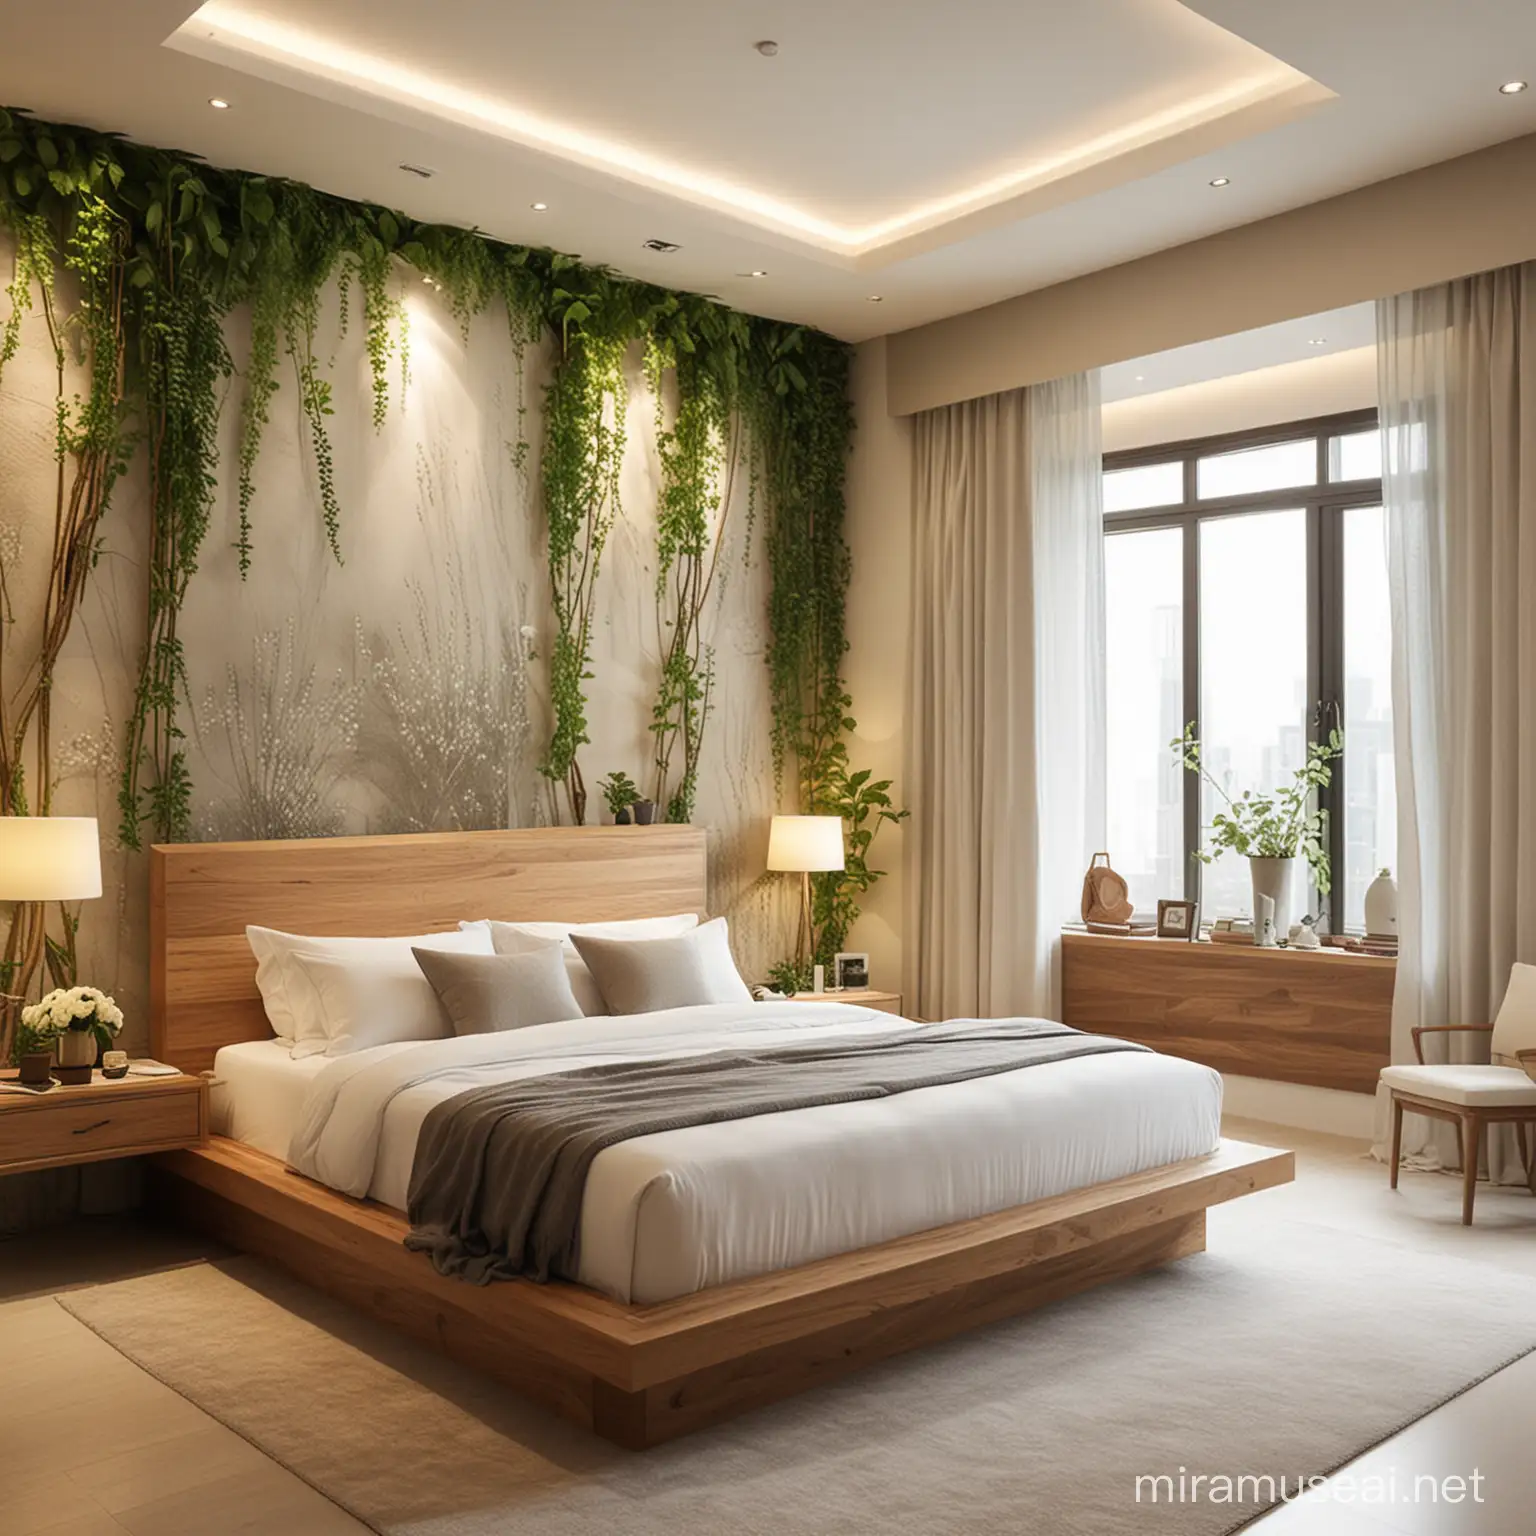 bed room using natural sactuary theme and concept